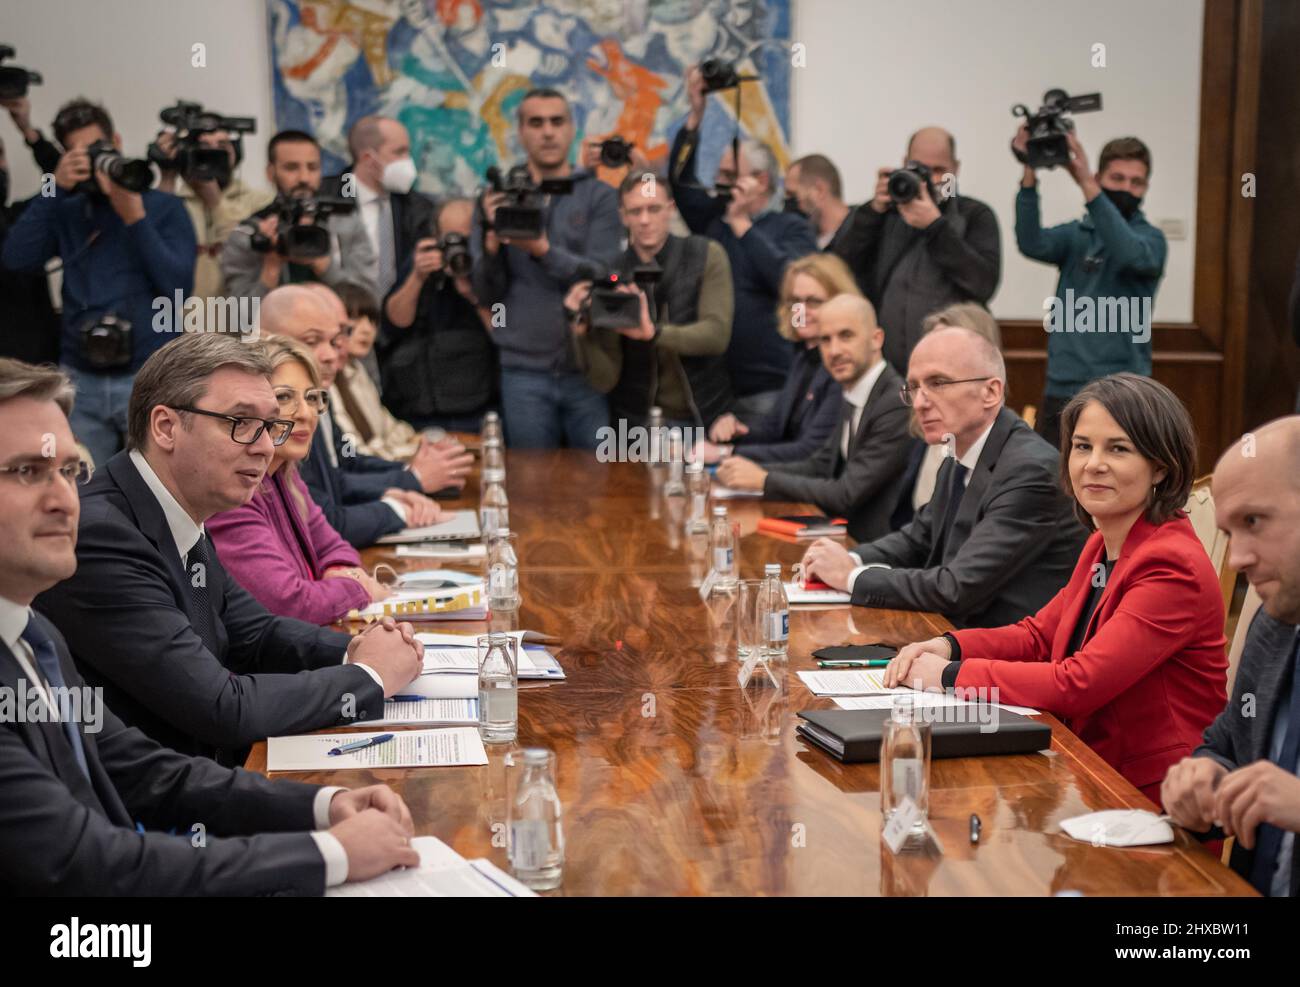 Belgrade, Serbia. 11th Mar, 2022. Annalena Baerbock (Bündnis90/Die Grünen, r), Foreign Minister, sits opposite Aleksander Vucic (2nd from left), President of the Republic of Serbia, in the Presidential Palace. Against the backdrop of the Russian war in Ukraine, Baerbock is campaigning for the Western Balkans to orient themselves further in the direction of Europe. Credit: Michael Kappeler/dpa/Alamy Live News Stock Photo